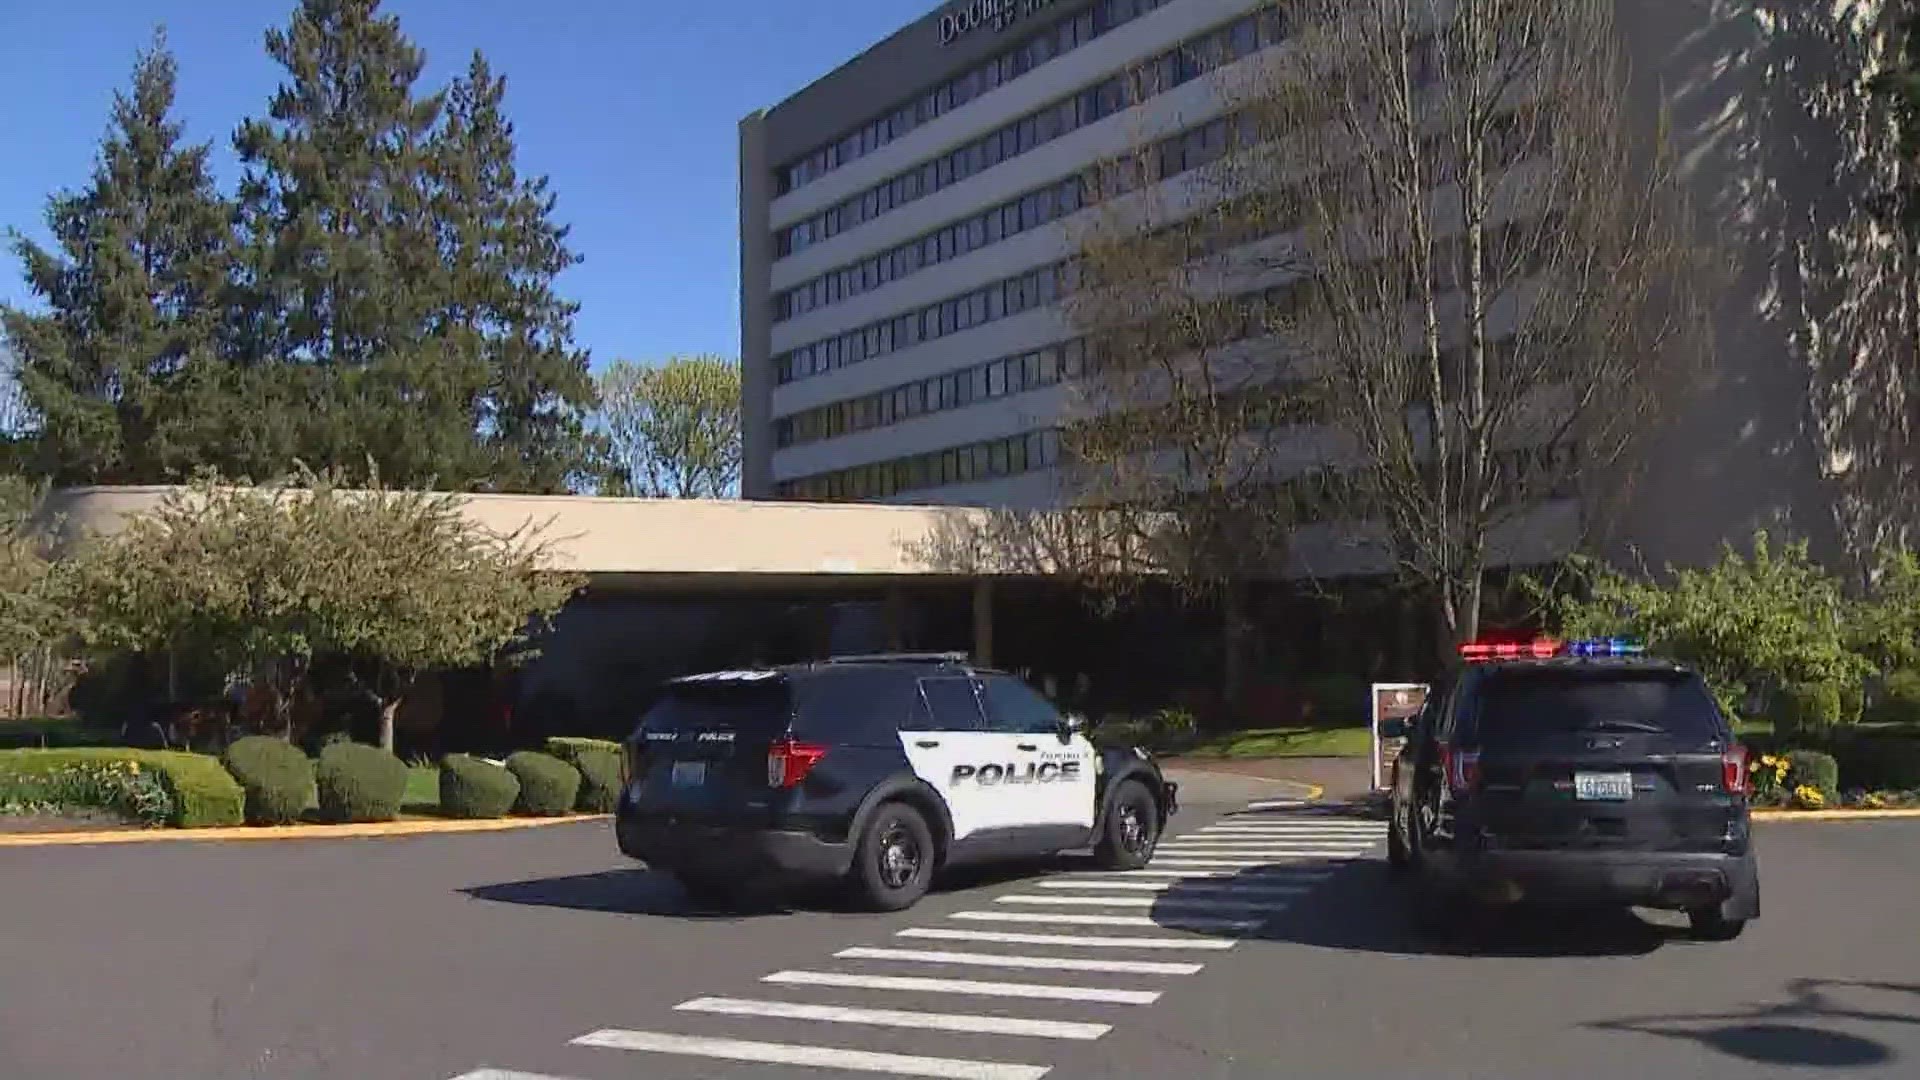 The shooting happened at the DoubleTree Suites by Hilton. According to police, one officer was grazed by a bullet and was treated for minor injuries.